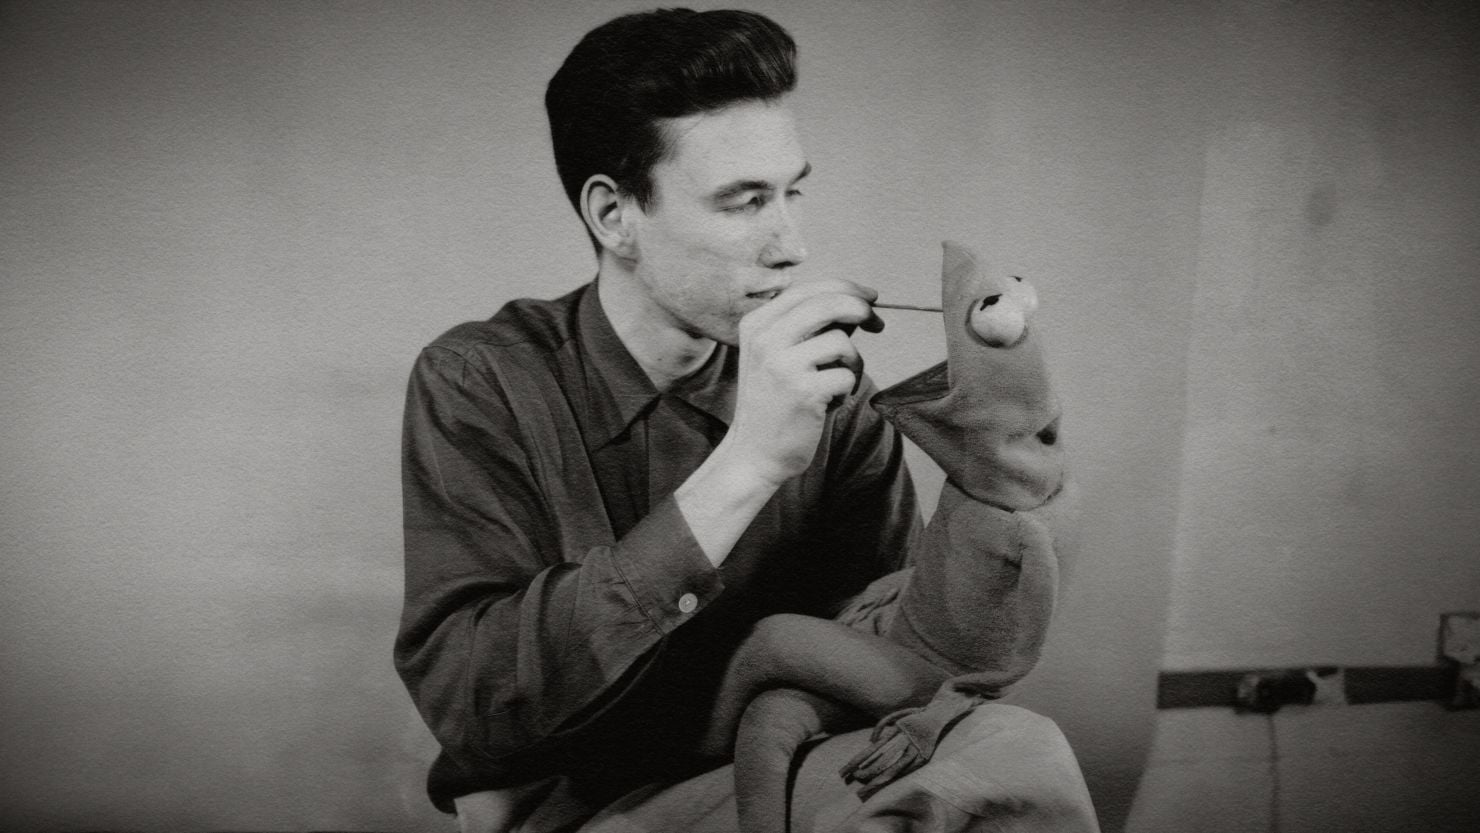 A young Jim Henson with Kermit the Frog in 